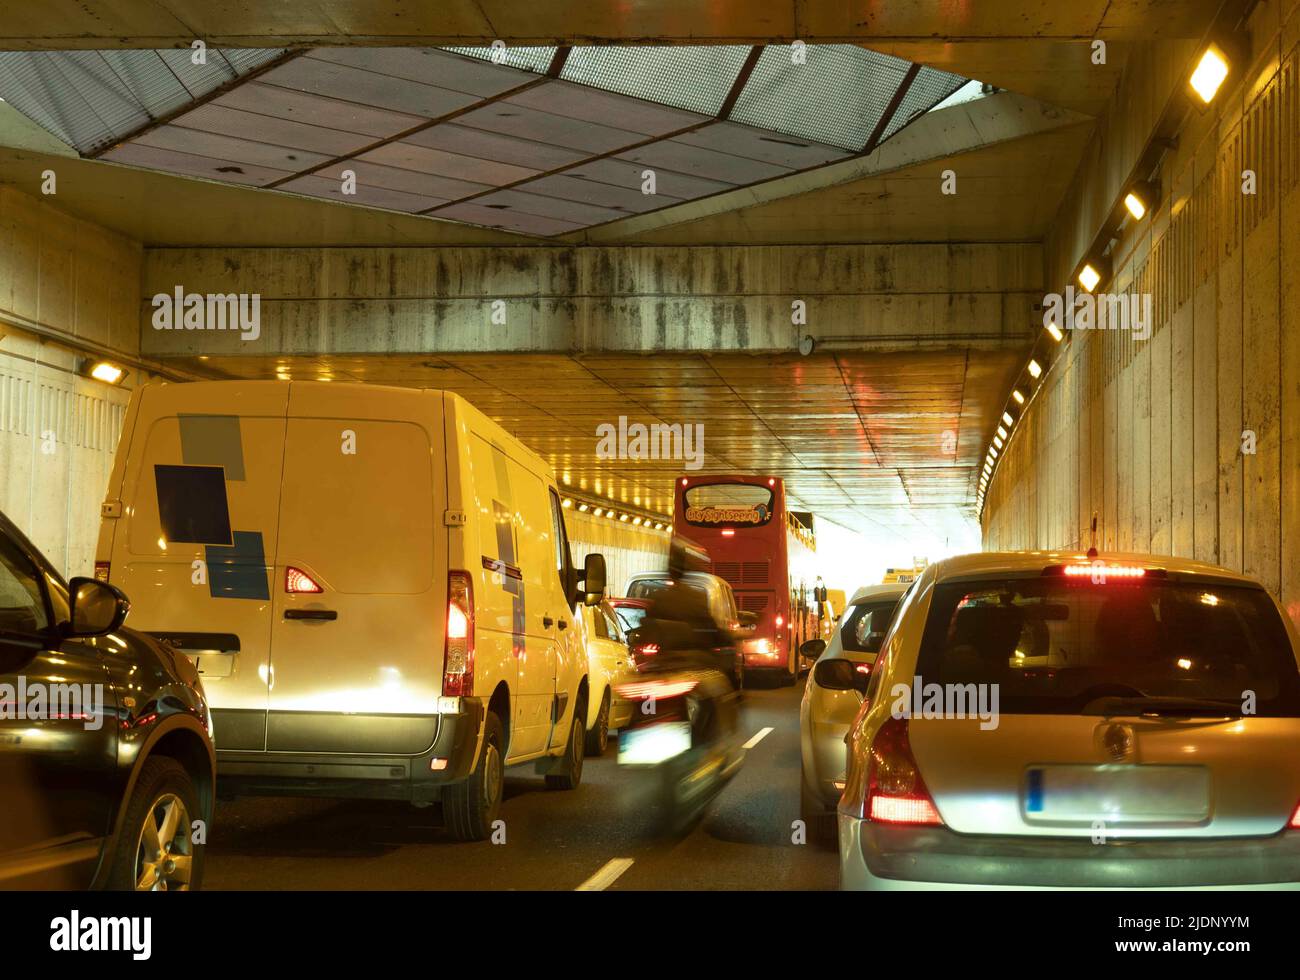 Heavy, jammed traffic of vehicles in city tunnel. Stock Photo